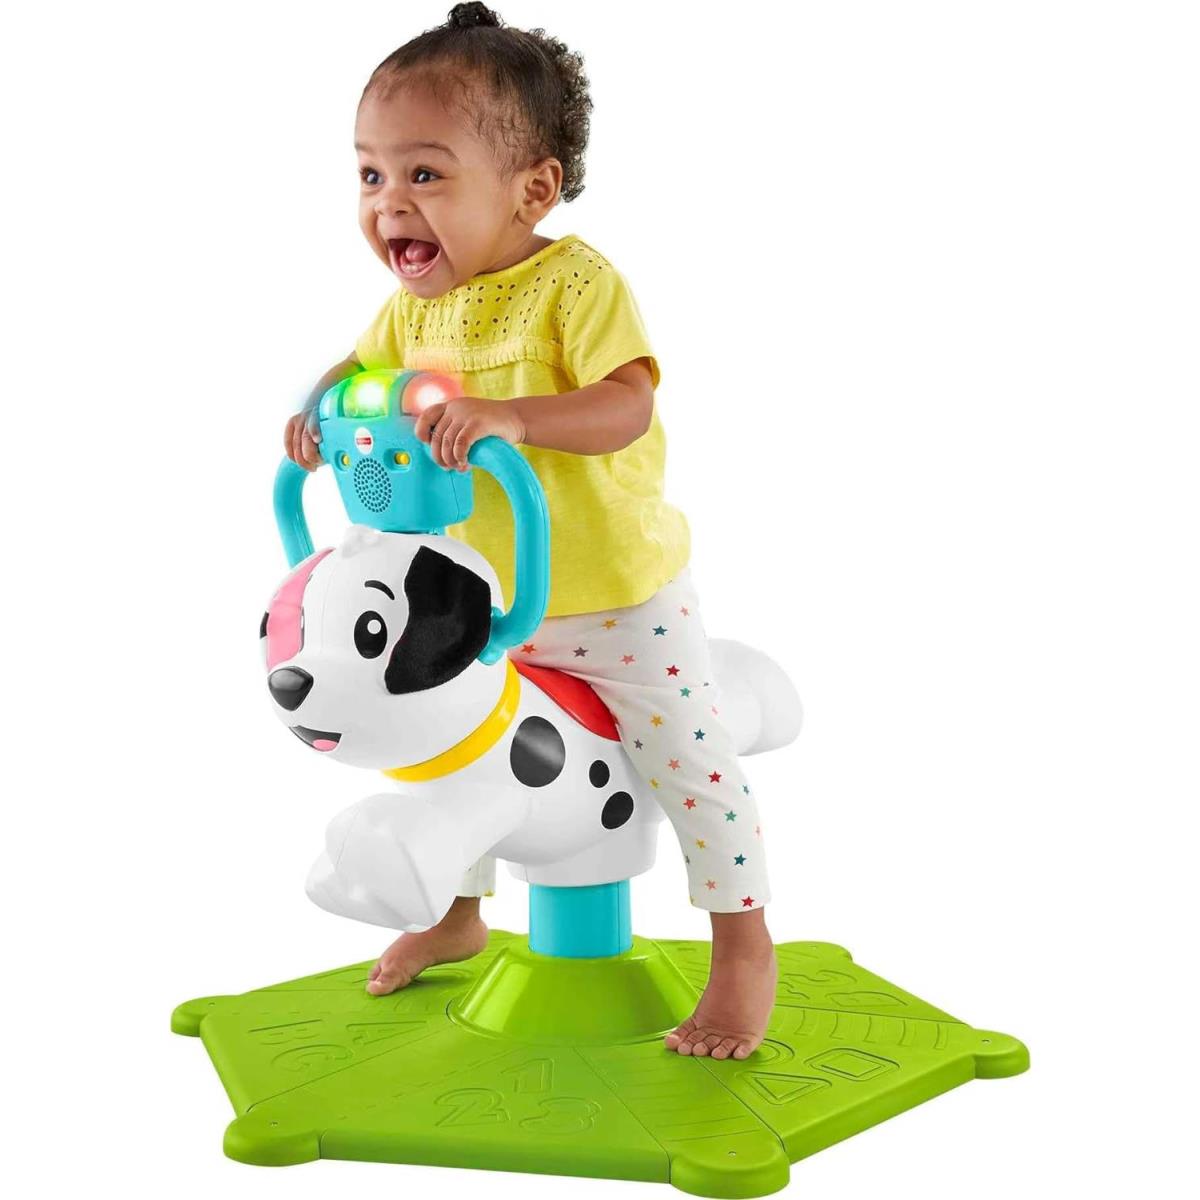 Fisher-price Bounce Spin Puppy Stationary Musical Bouncer Ride-on Learning Toy